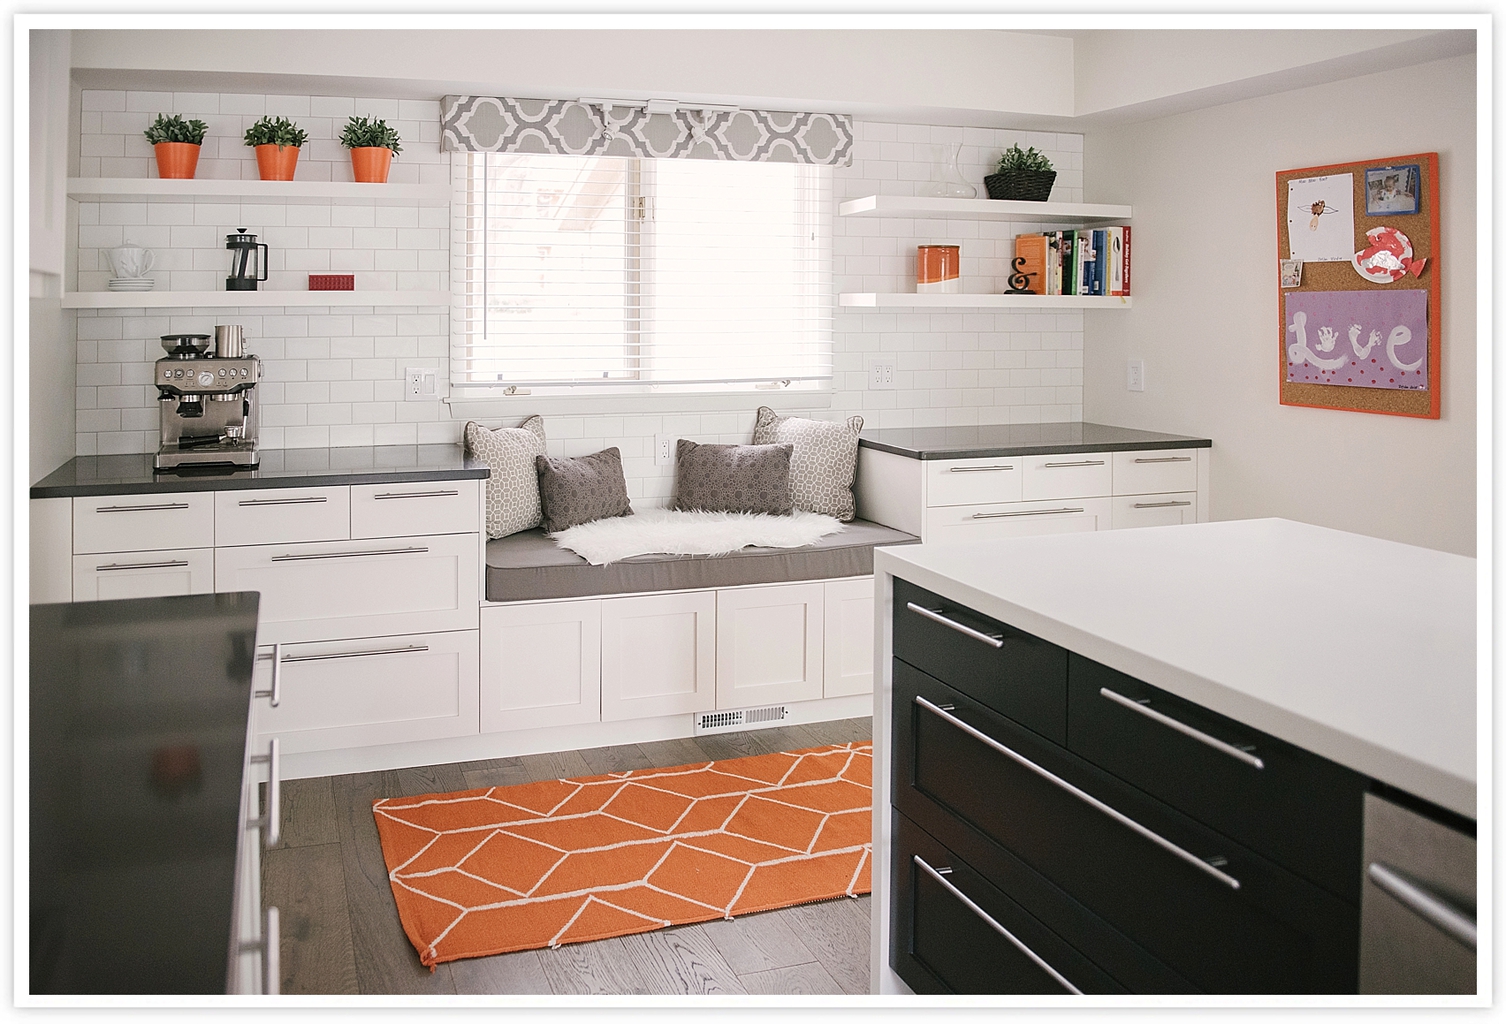 After: Clean white modern black and white IKEA kitchen with Semihandmade cabinet faces, CB2 bar stools, open shelving, a window seat, dorian white waterfall countertops, and a Tamburo hood vent (with orange accents)